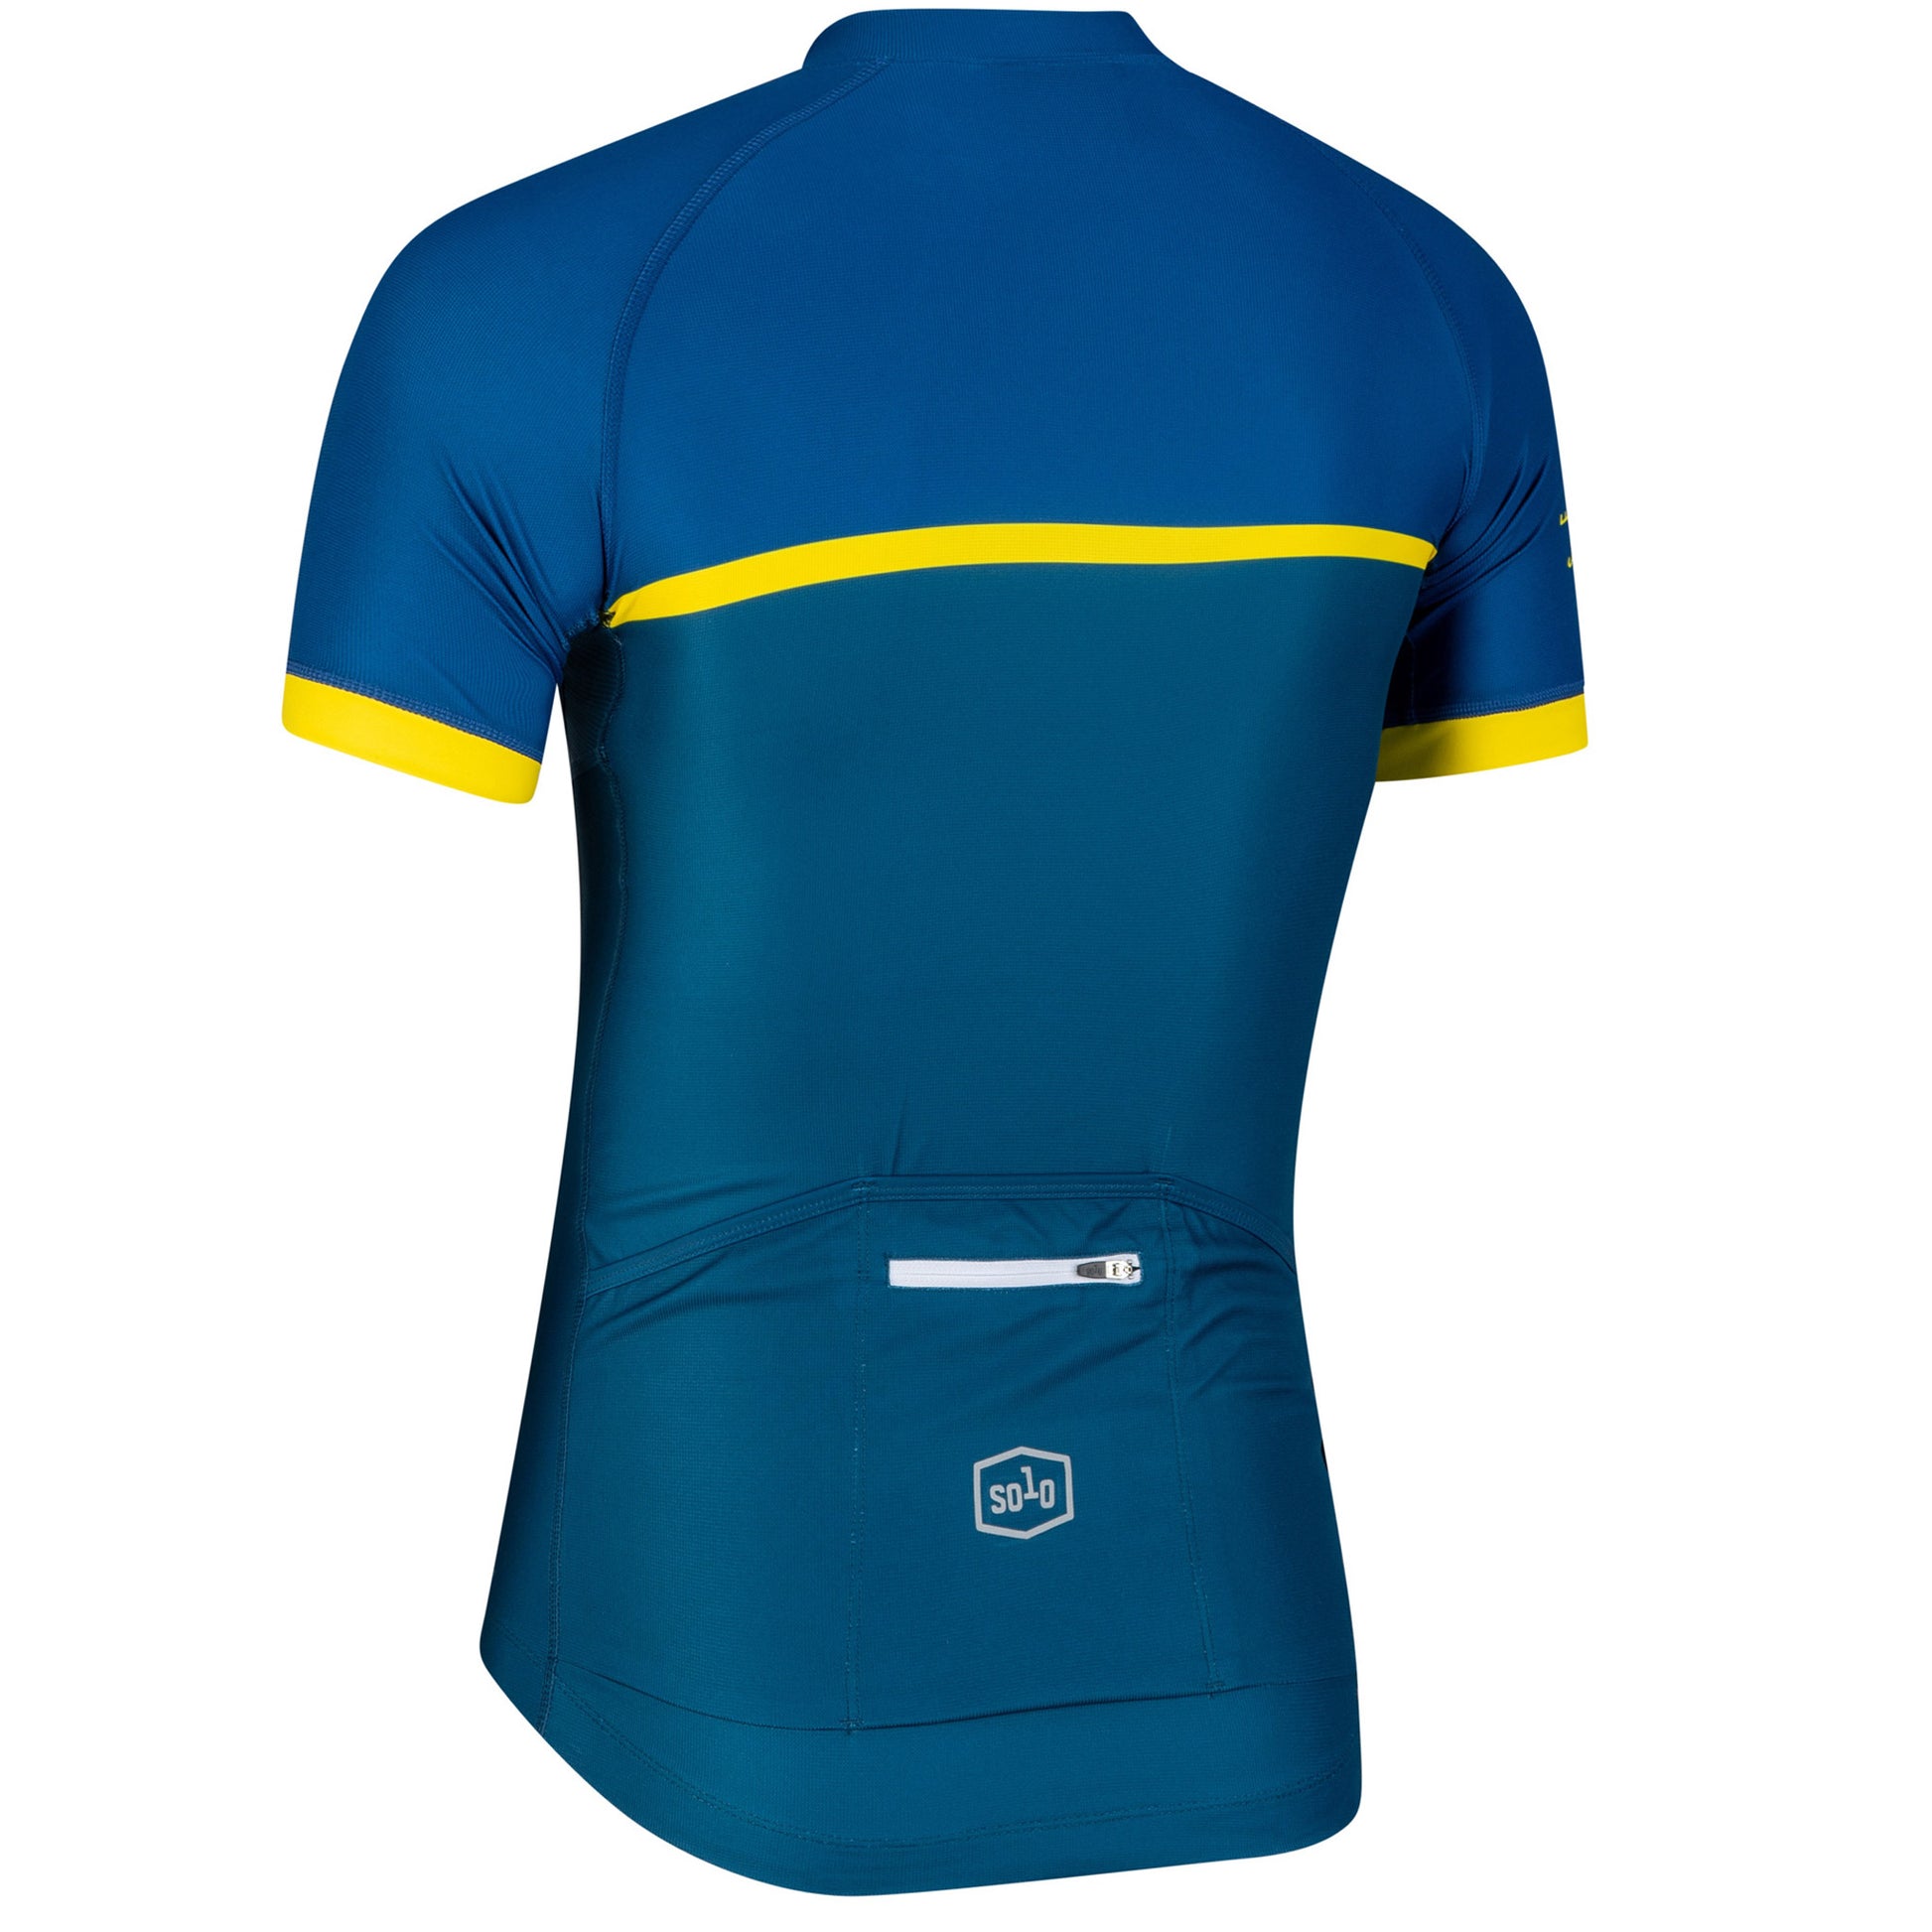 Solo Mens Cadence Jersey, Blue/Fluro Yellow, buy online at Woolys Wheels with free delivery